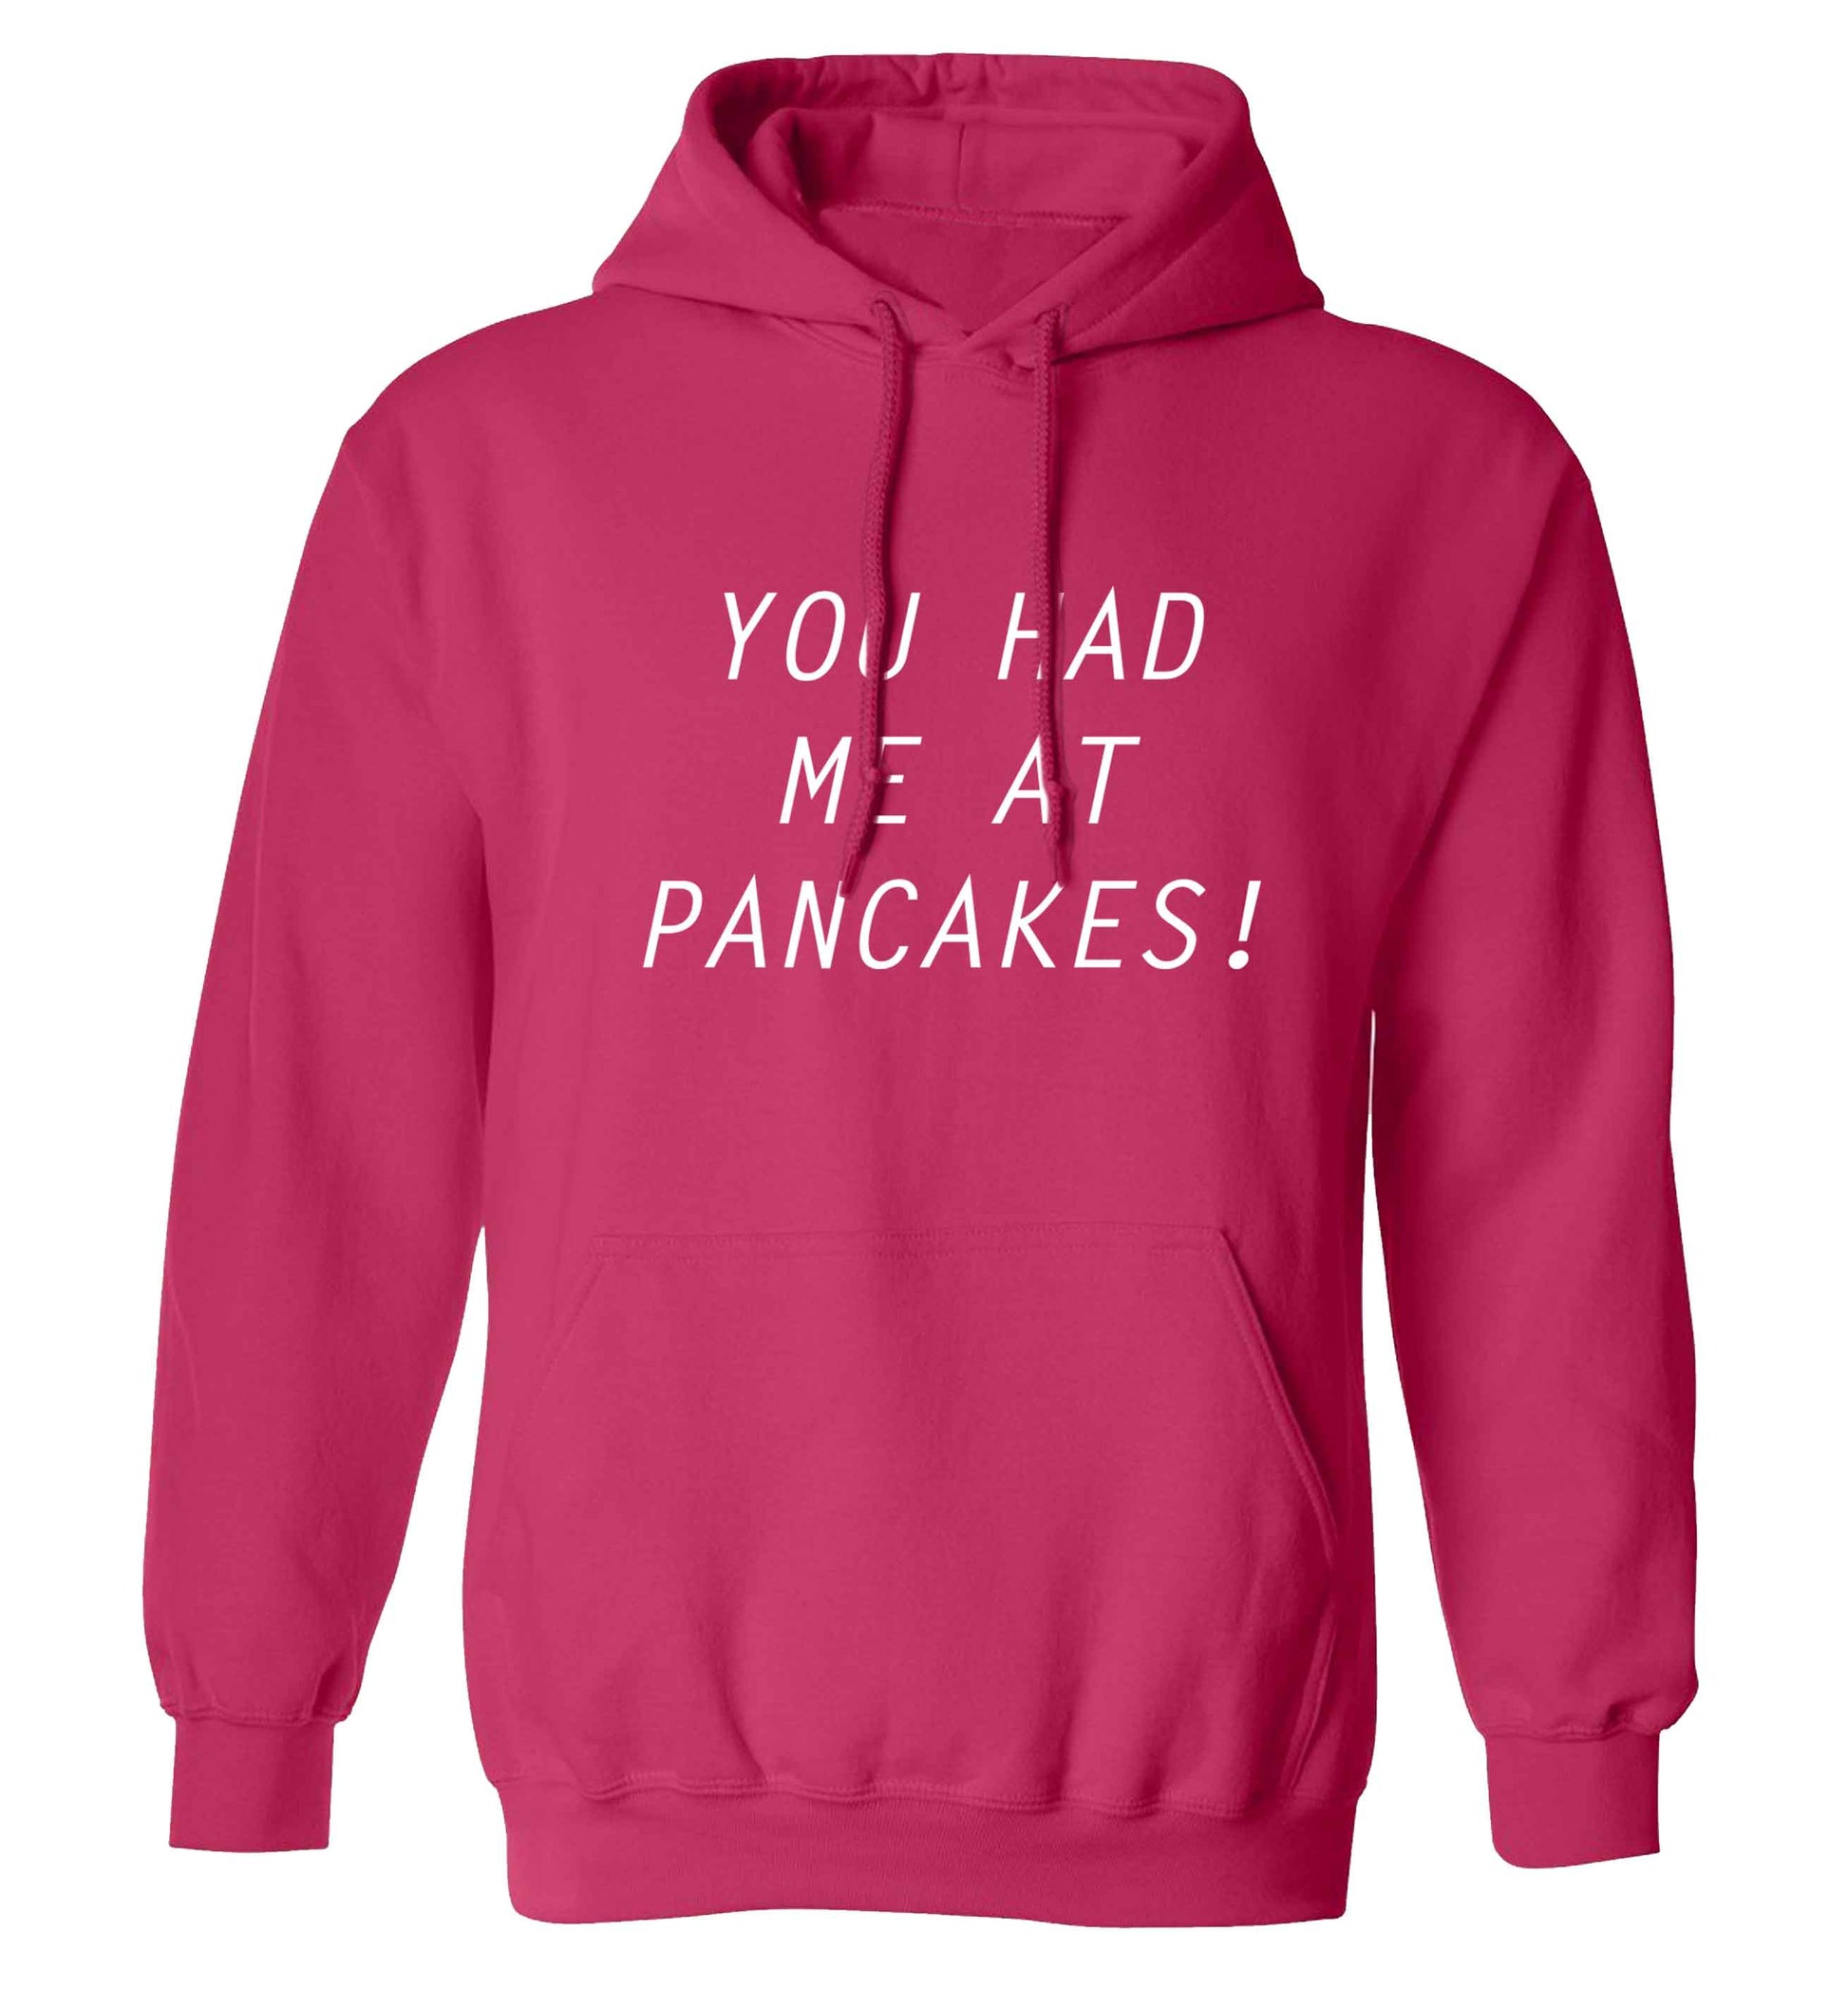 You had me at pancakes adults unisex pink hoodie 2XL